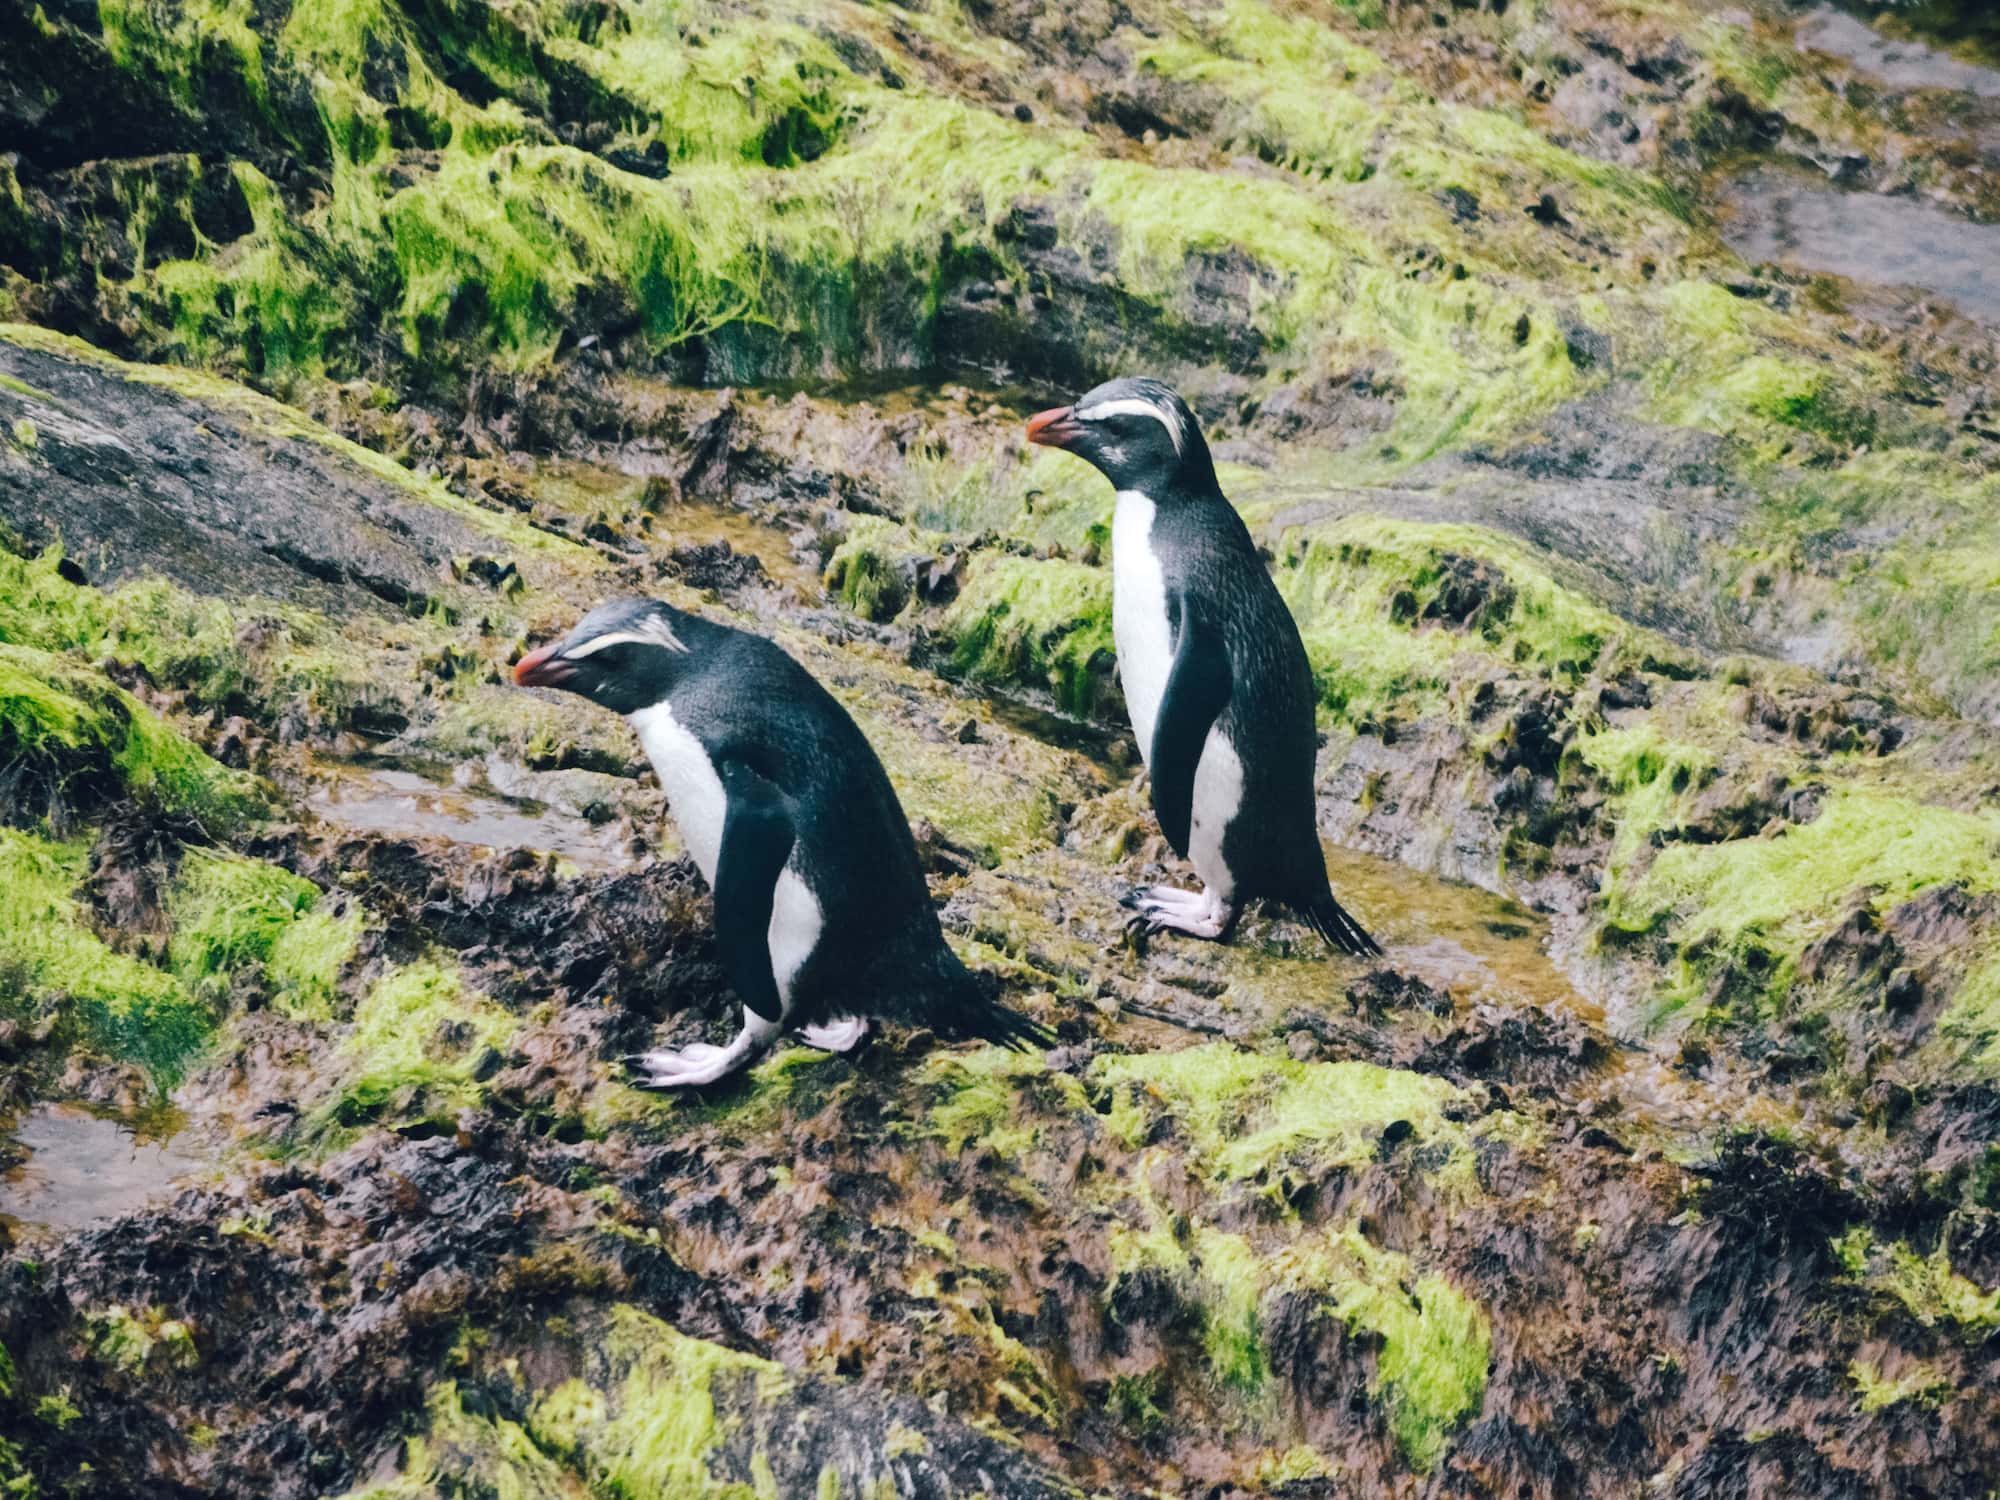 Two penguins standing